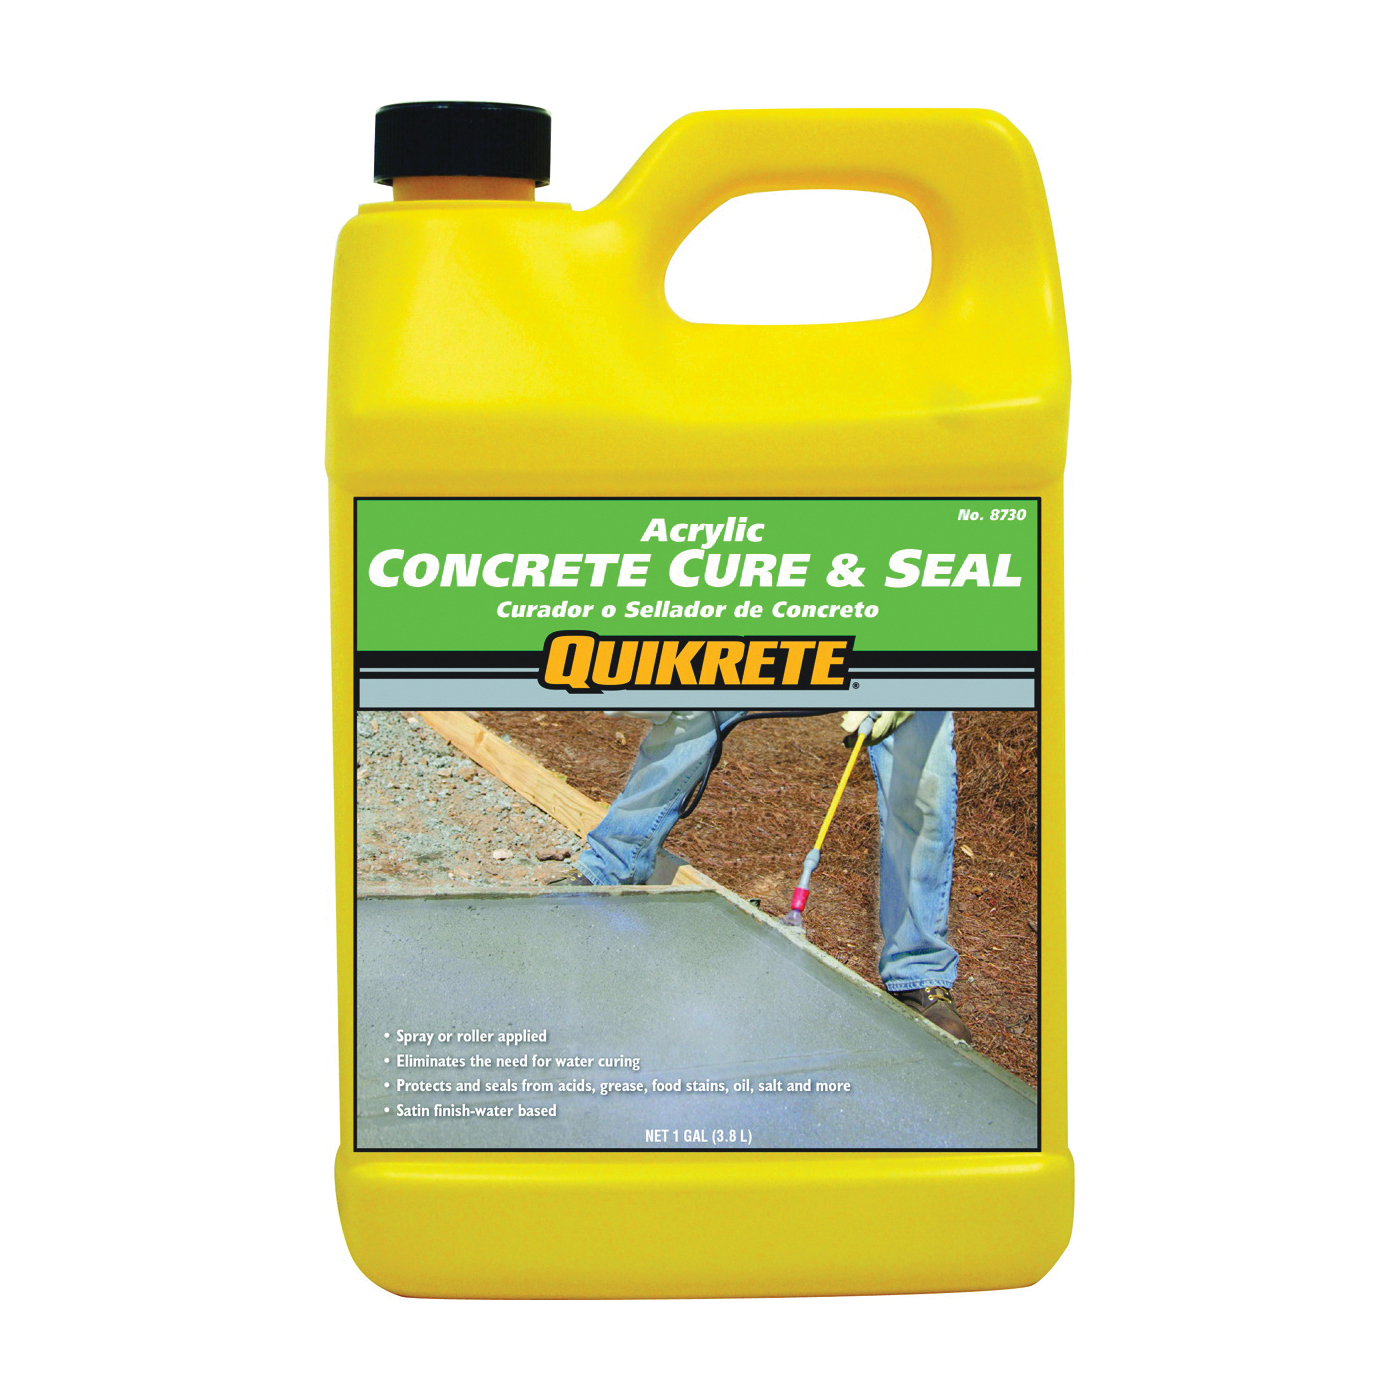 Quikrete 873003 Acrylic Concrete Cure and Seal, White, Liquid, 1 gal Bottle - 1